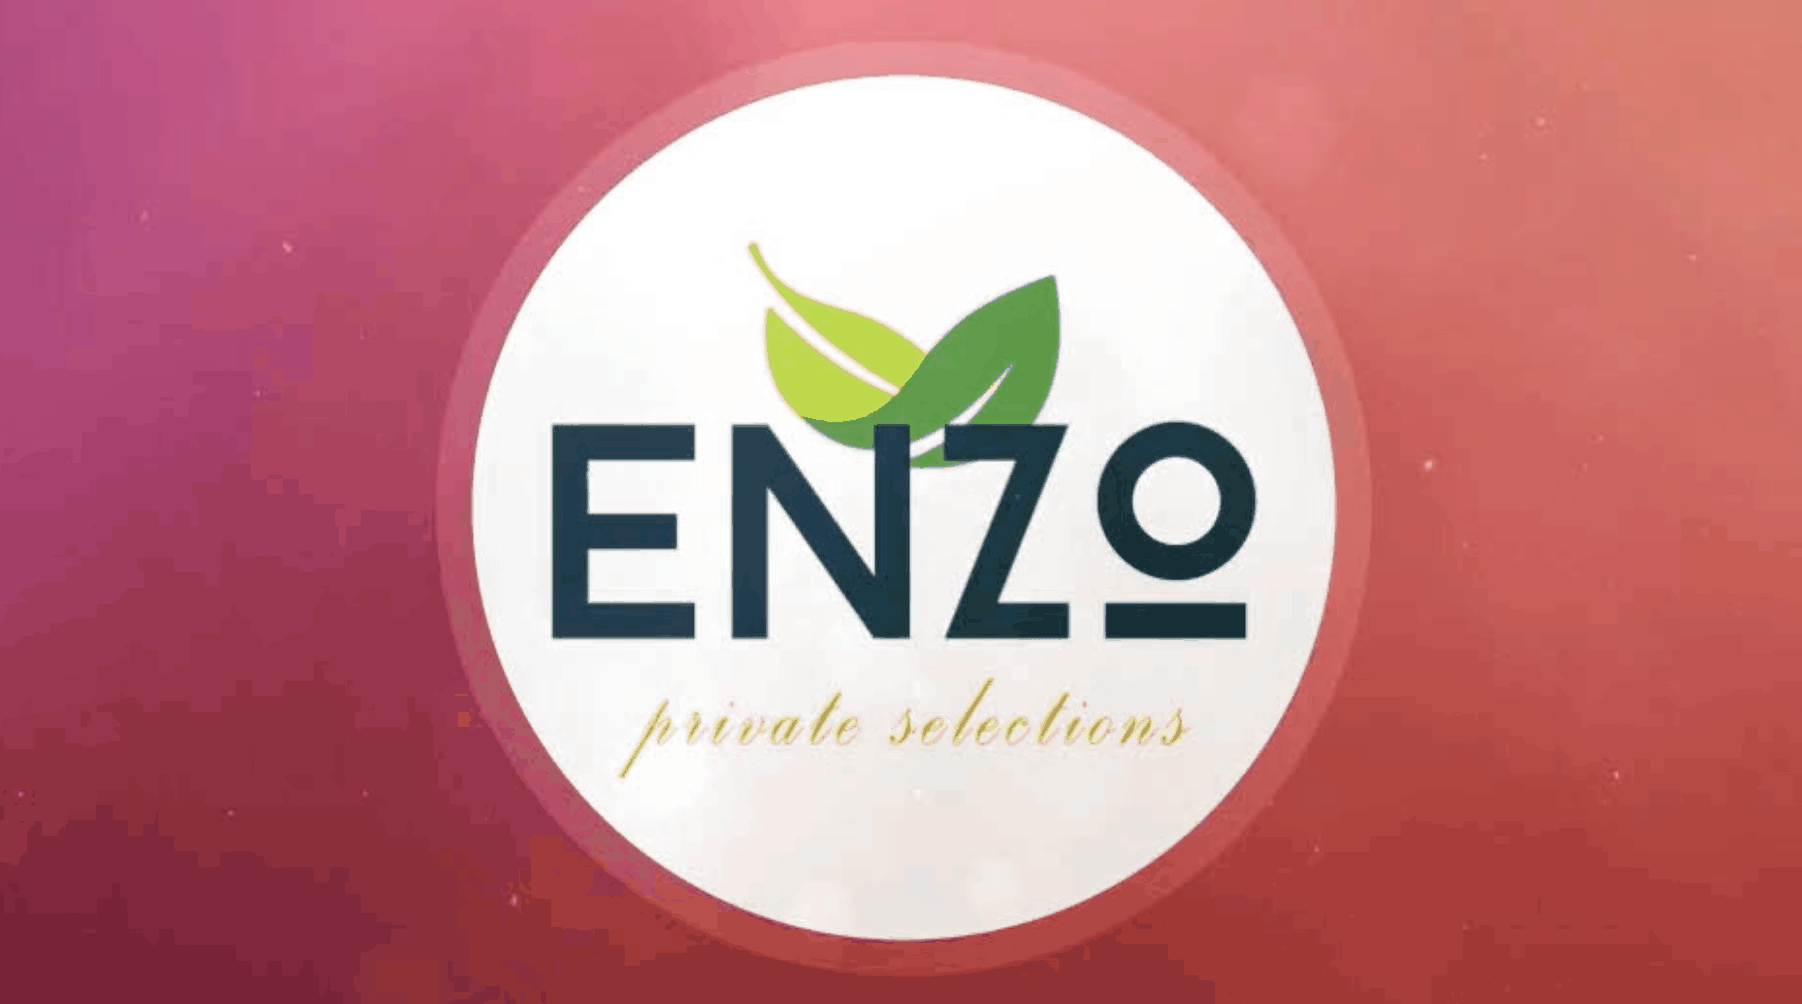 Nature logo - Enzo Private Selections